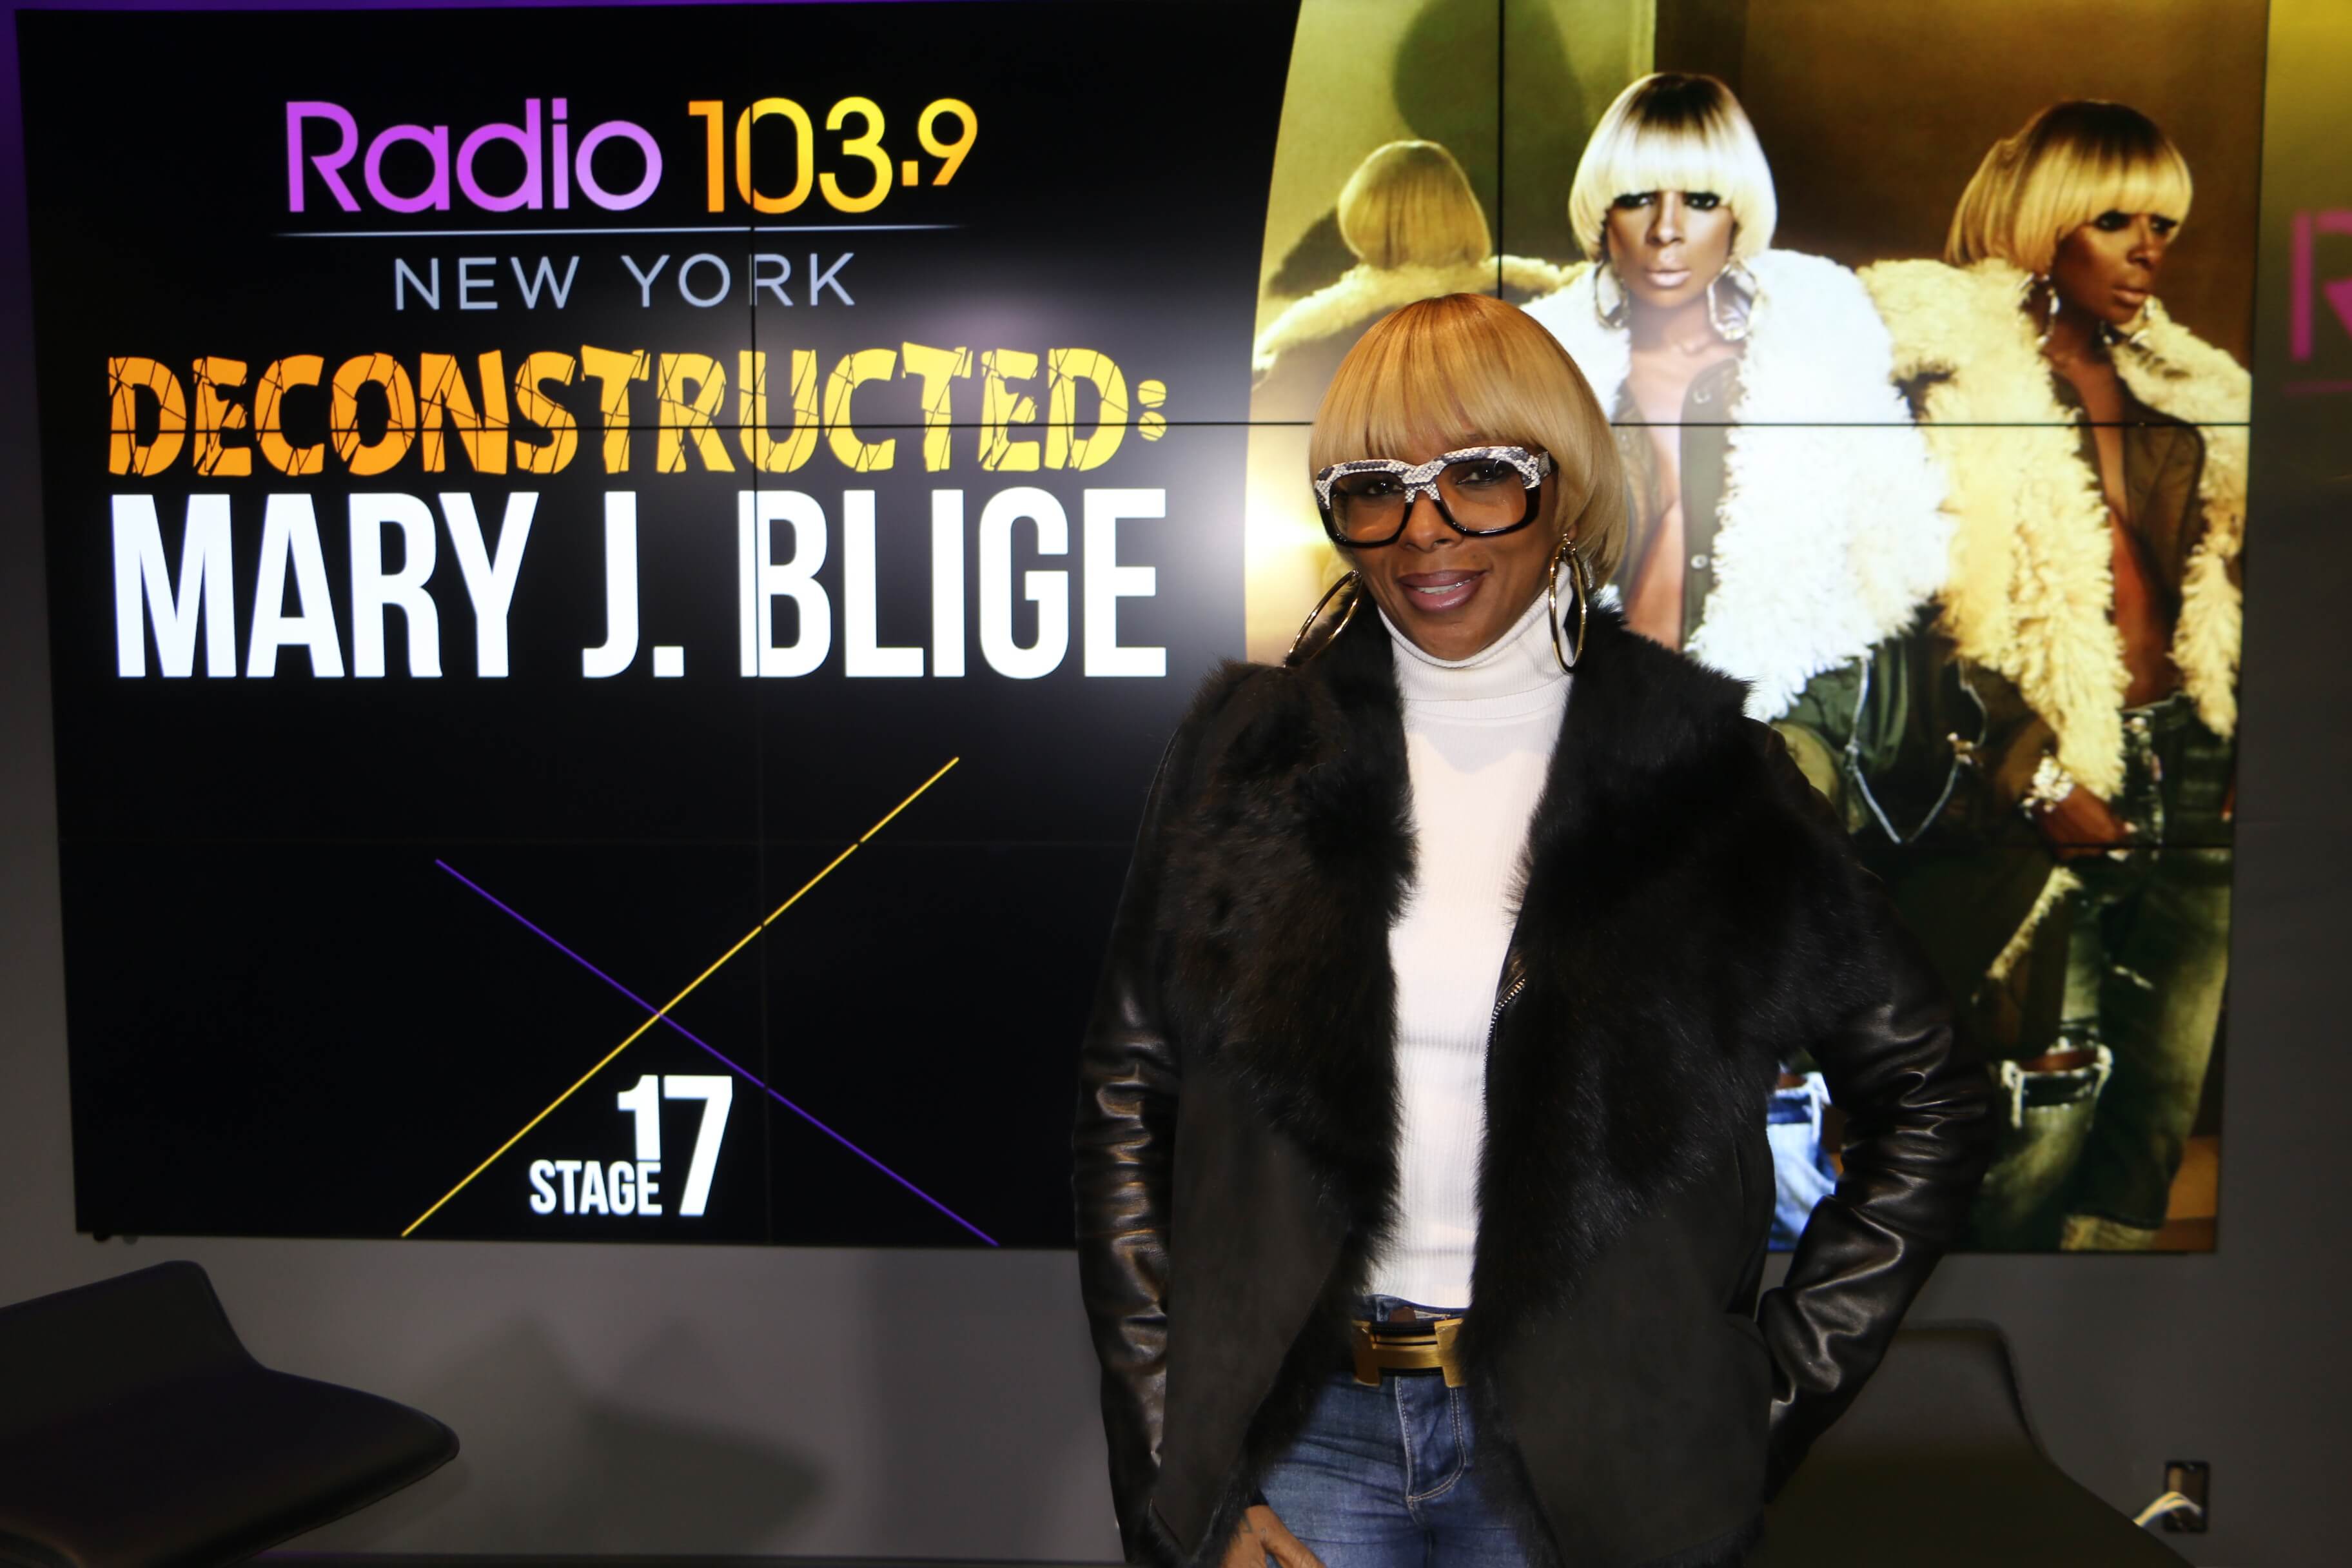 Deconstructed: Mary J. Blige